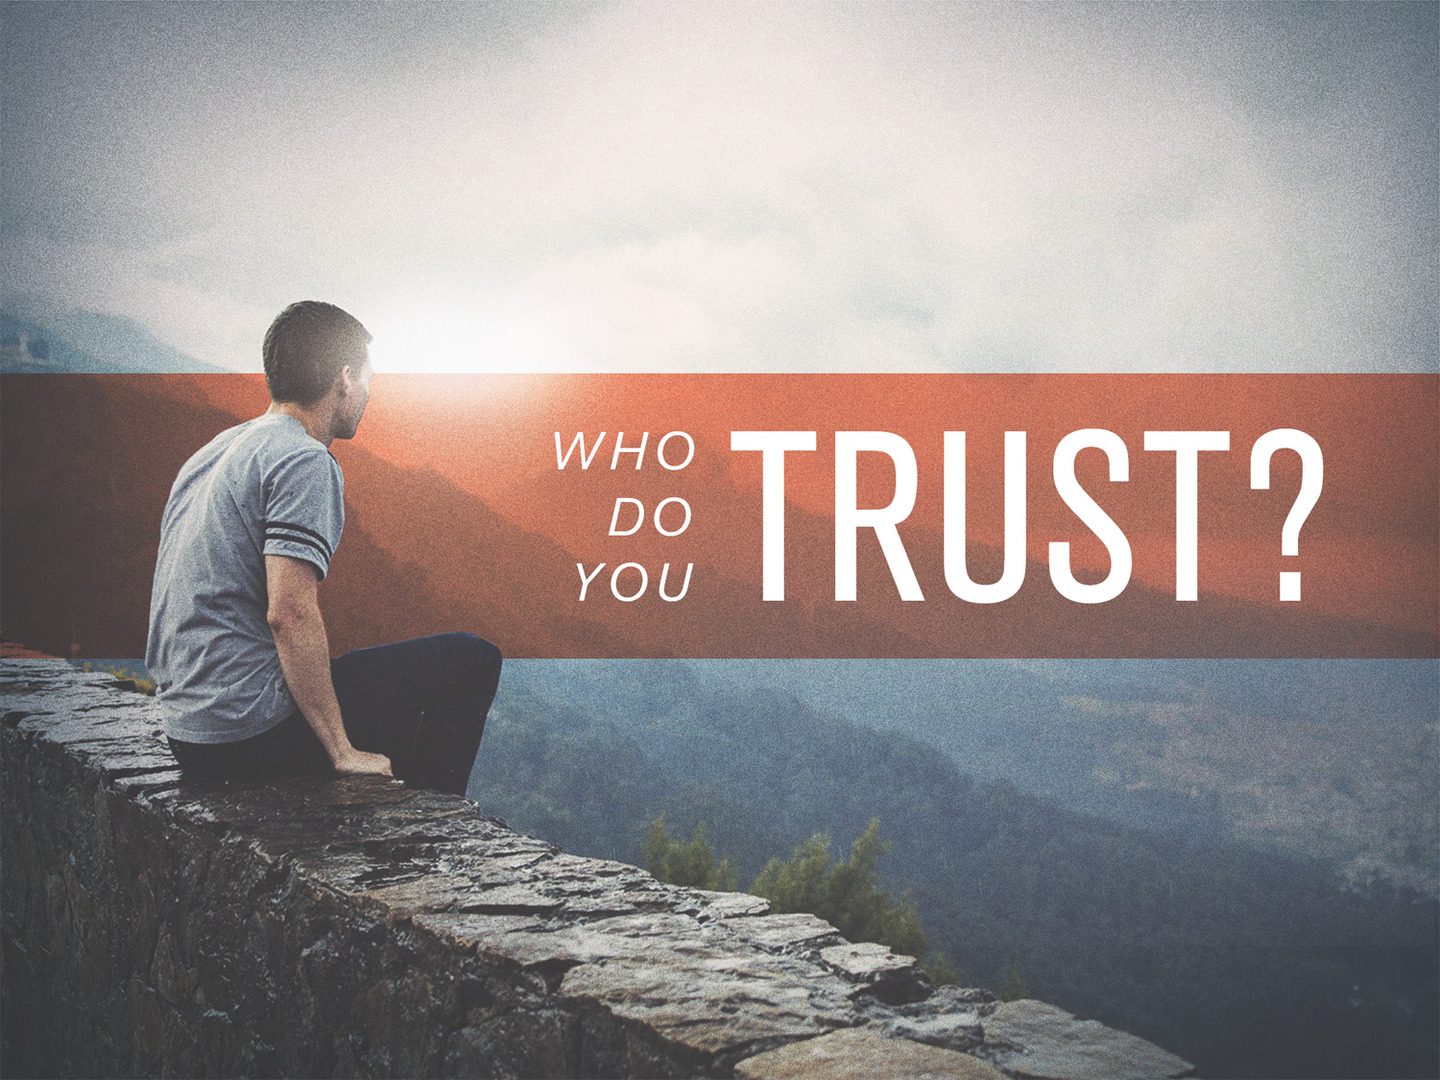 May I Suggest a Sermon Series Pt. 2 “Giving and Earning Trust with People” By: Pastor Jimmy Vaughn